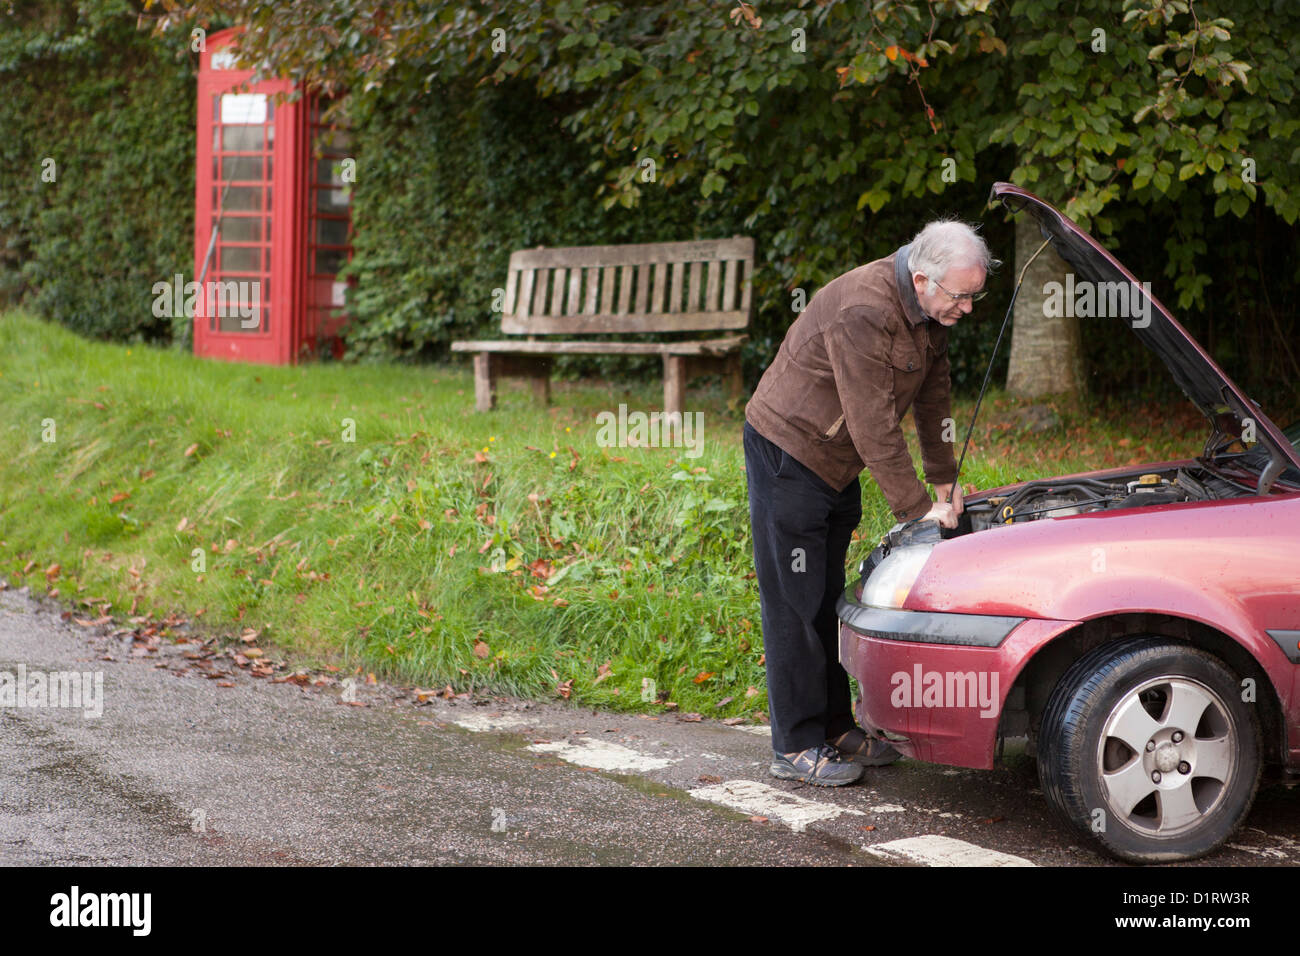 Man looking under bonnet of broken down car at side of road with telephone box and bench in background Stock Photo